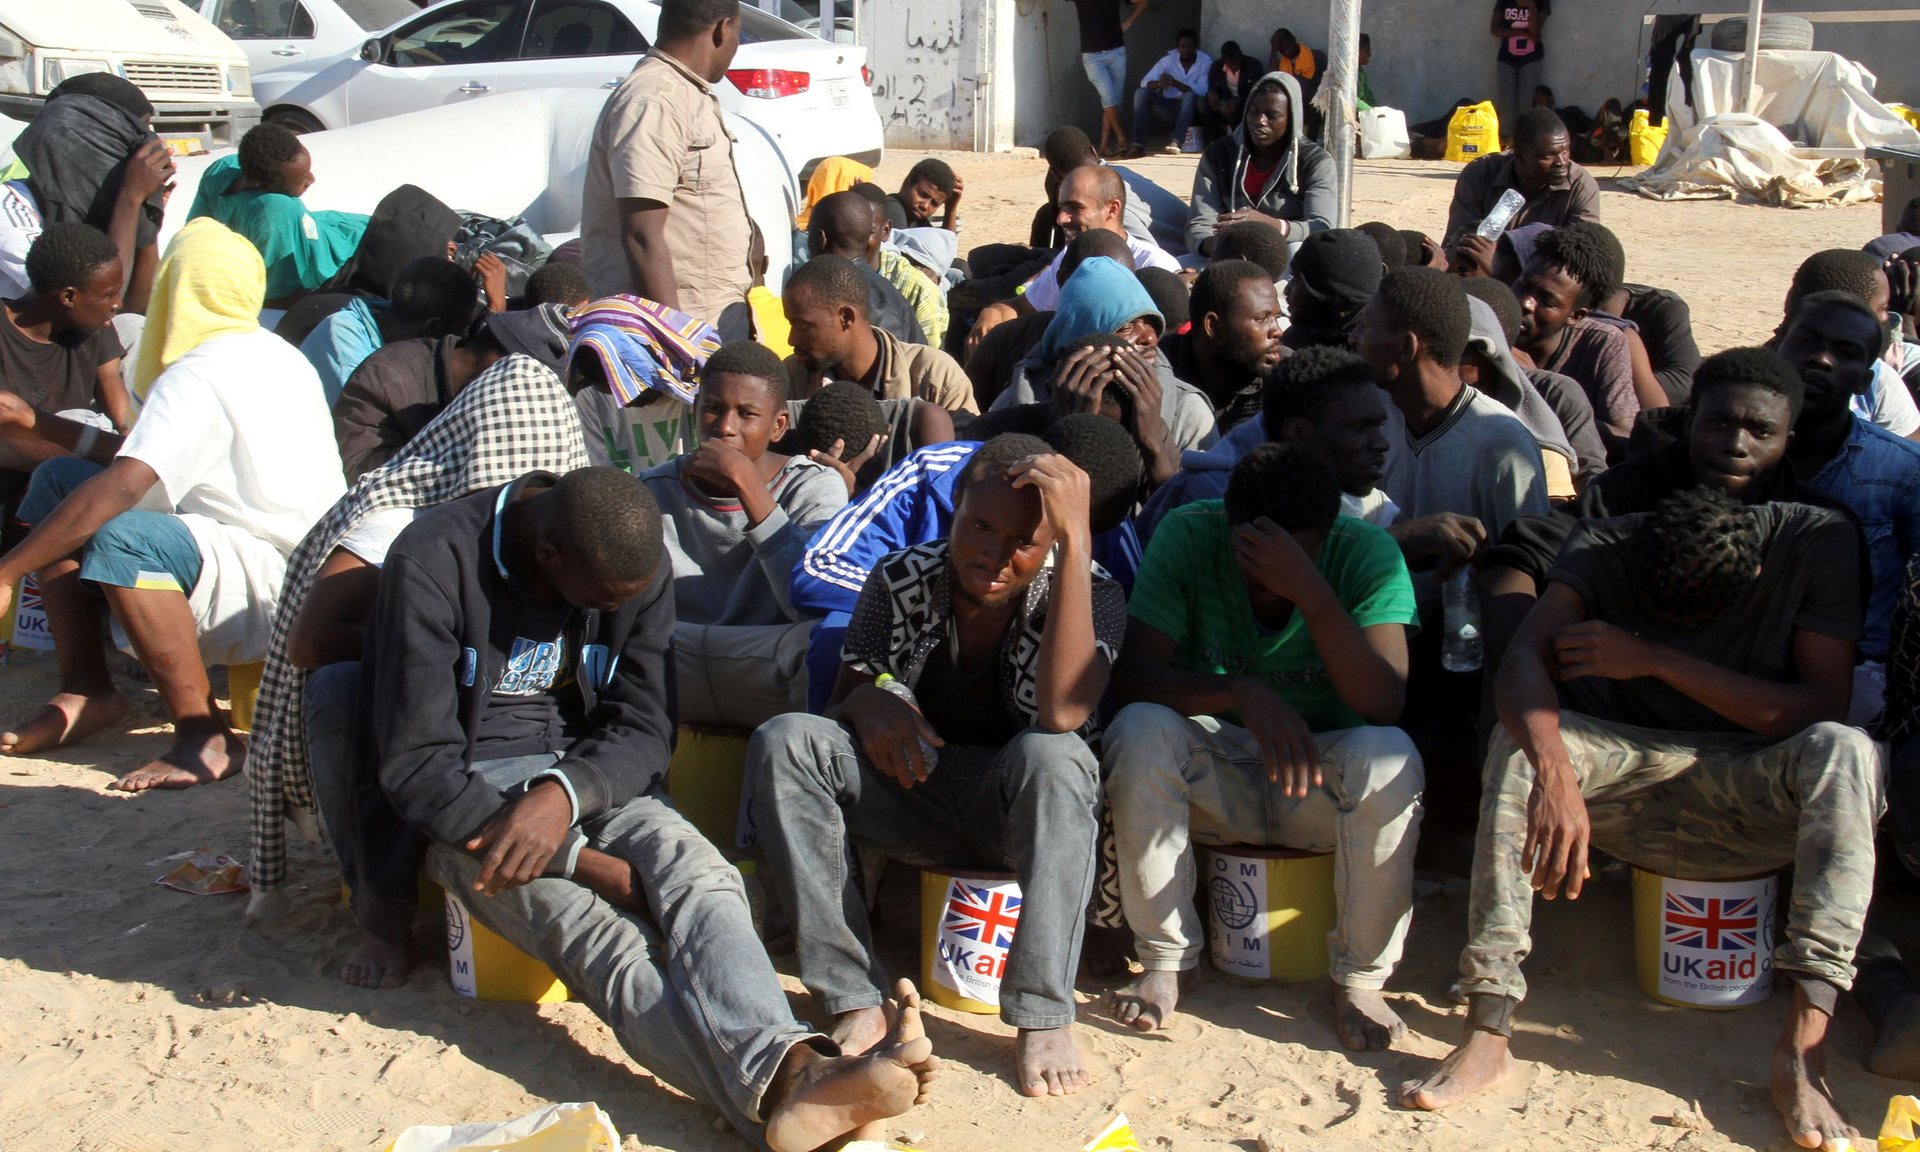 Illegal migrants in a port east of the Libyan capital, Tripoli. Hulme argues that ‘any serious attempt to reduce the flow of Africans crossing the Mediterranean … entails rich nations actively promoting economic growth and job creation in Africa’. Photograph: AFP/Getty